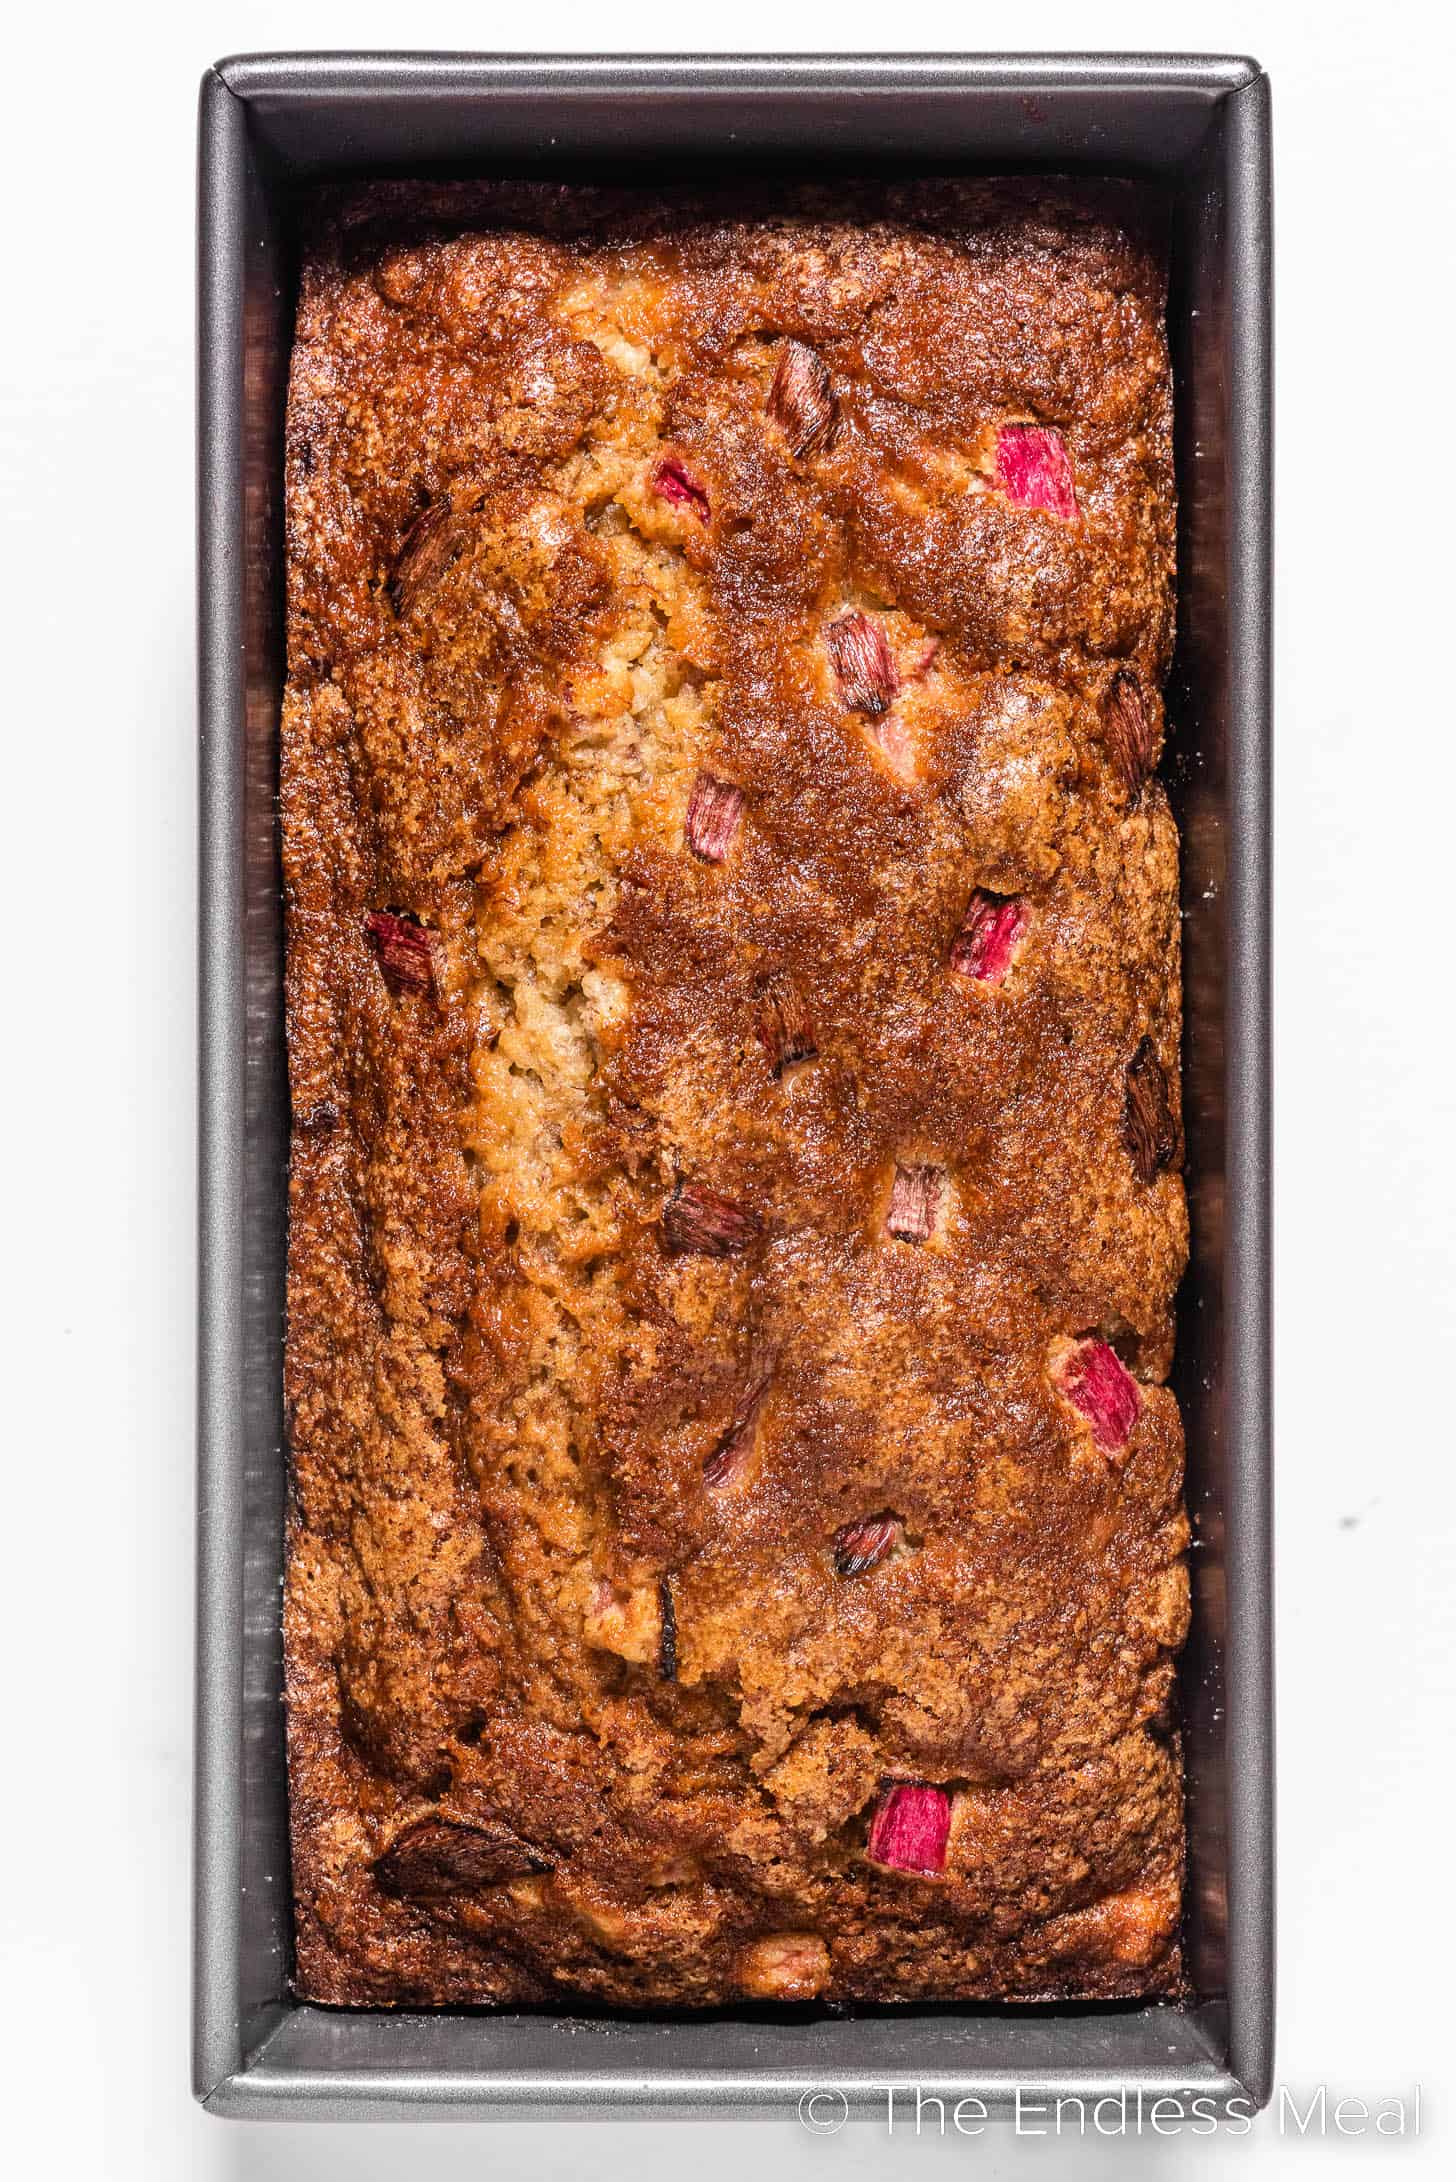 banana bread made with rhubarb in a loaf pan